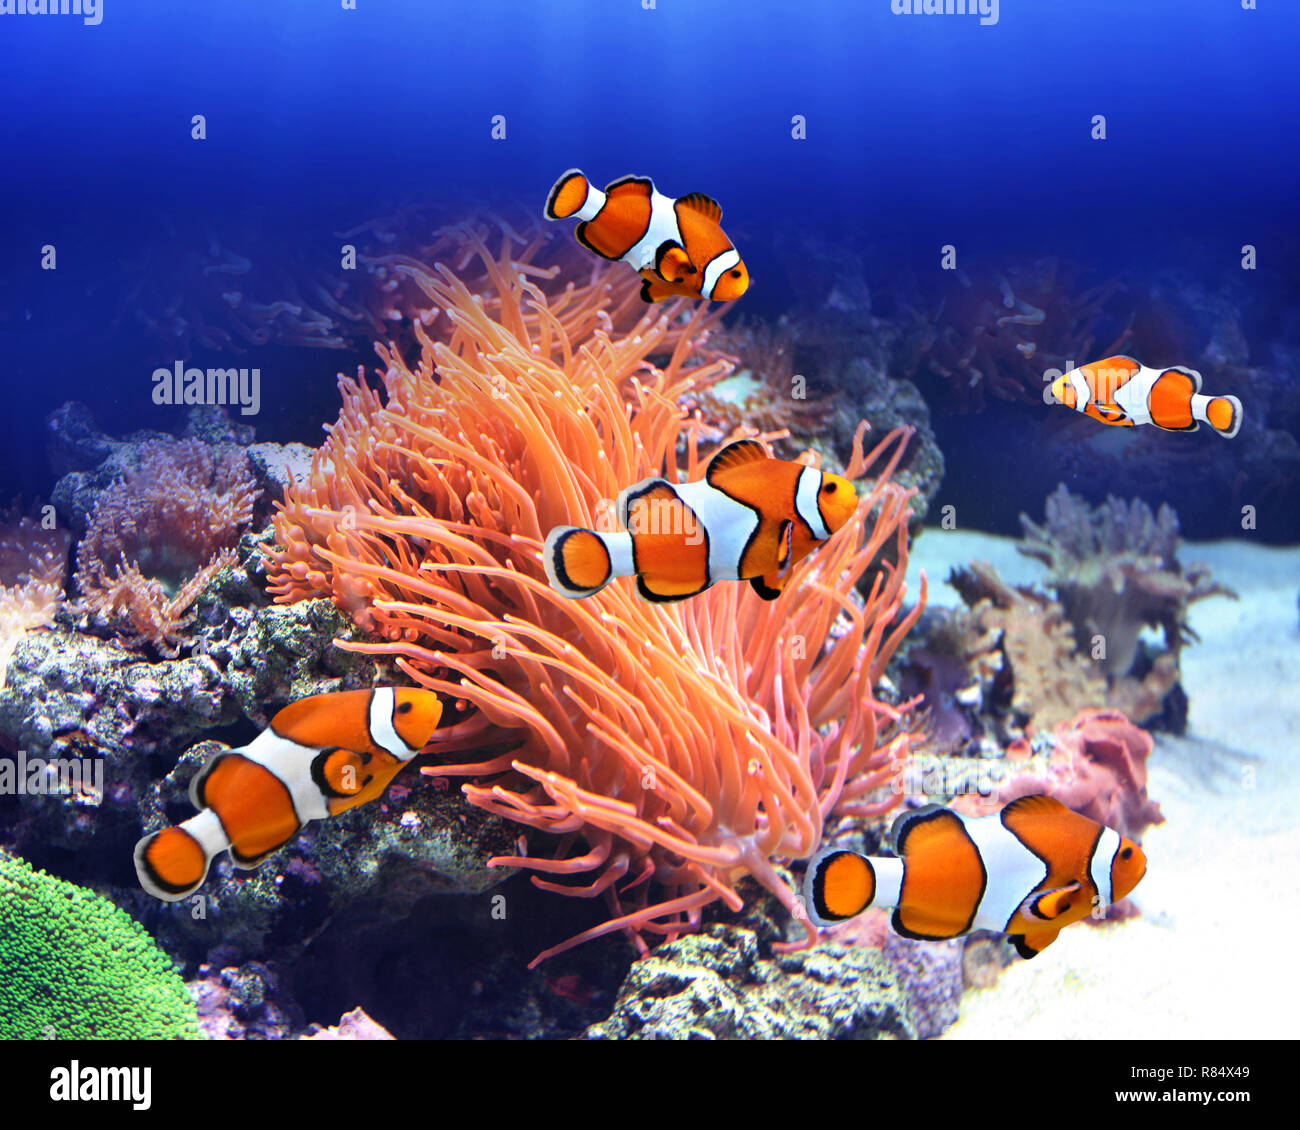 Sea anemone and clown fish in ocean Stock Photo